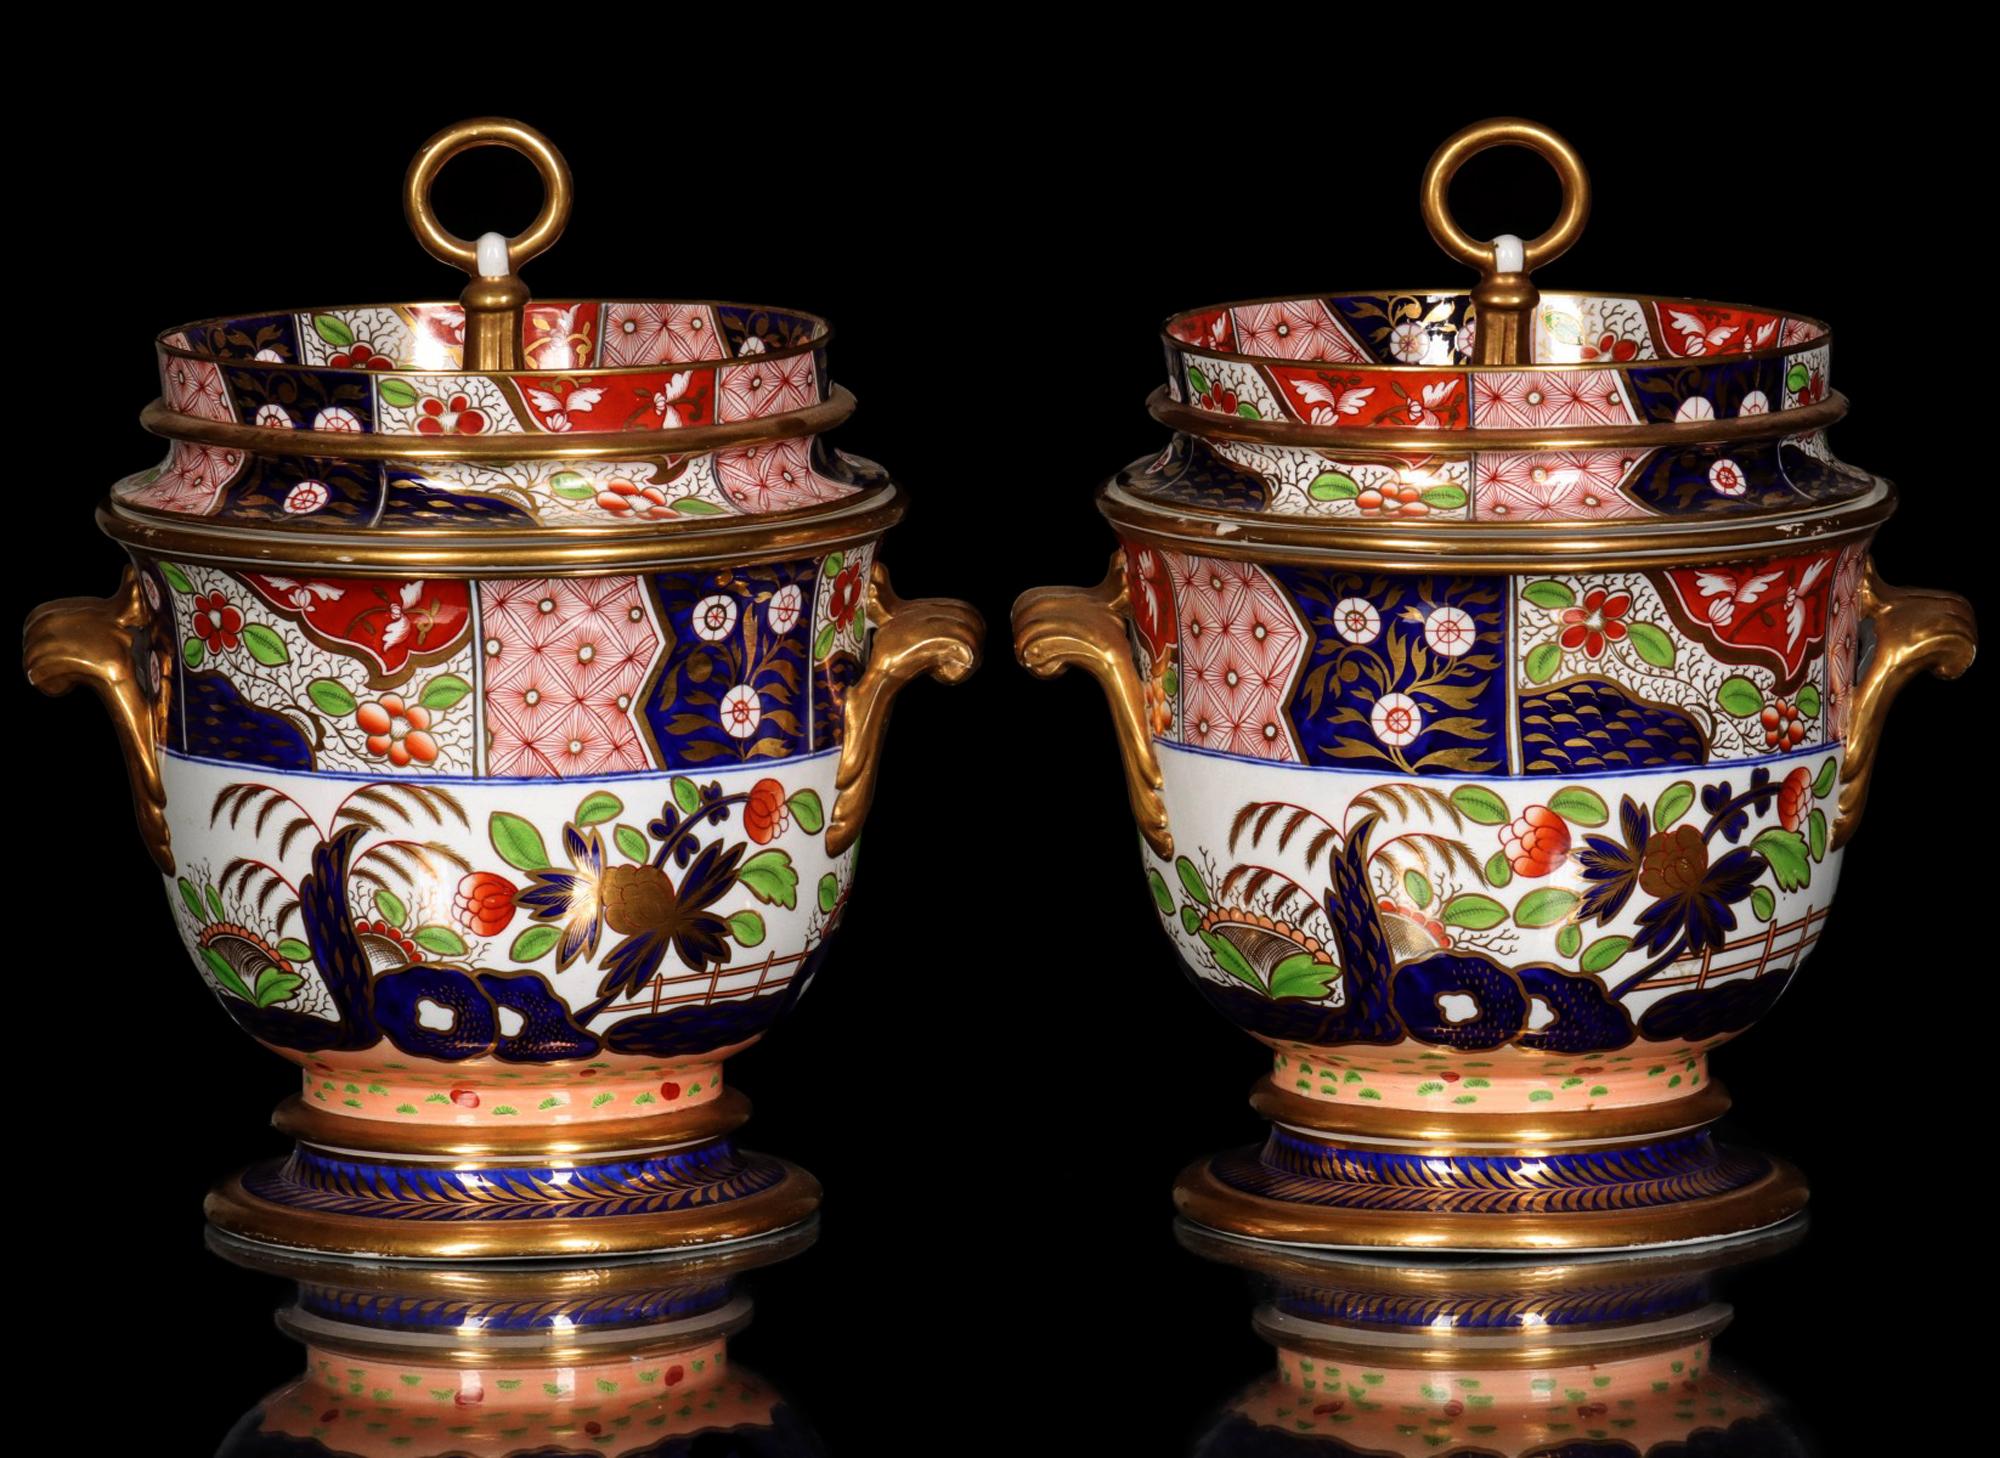 Regency Period Spode Porcelain Imari Fruit Coolers, Covers & Liners,
Pattern 2596,
A Rock & Tree Pattern,
Circa 1810

The Regency Spode Porcelain Imari Fruit Coolers, Covers & Liners are painted in a vibrant Imari palette which is richly gilded and